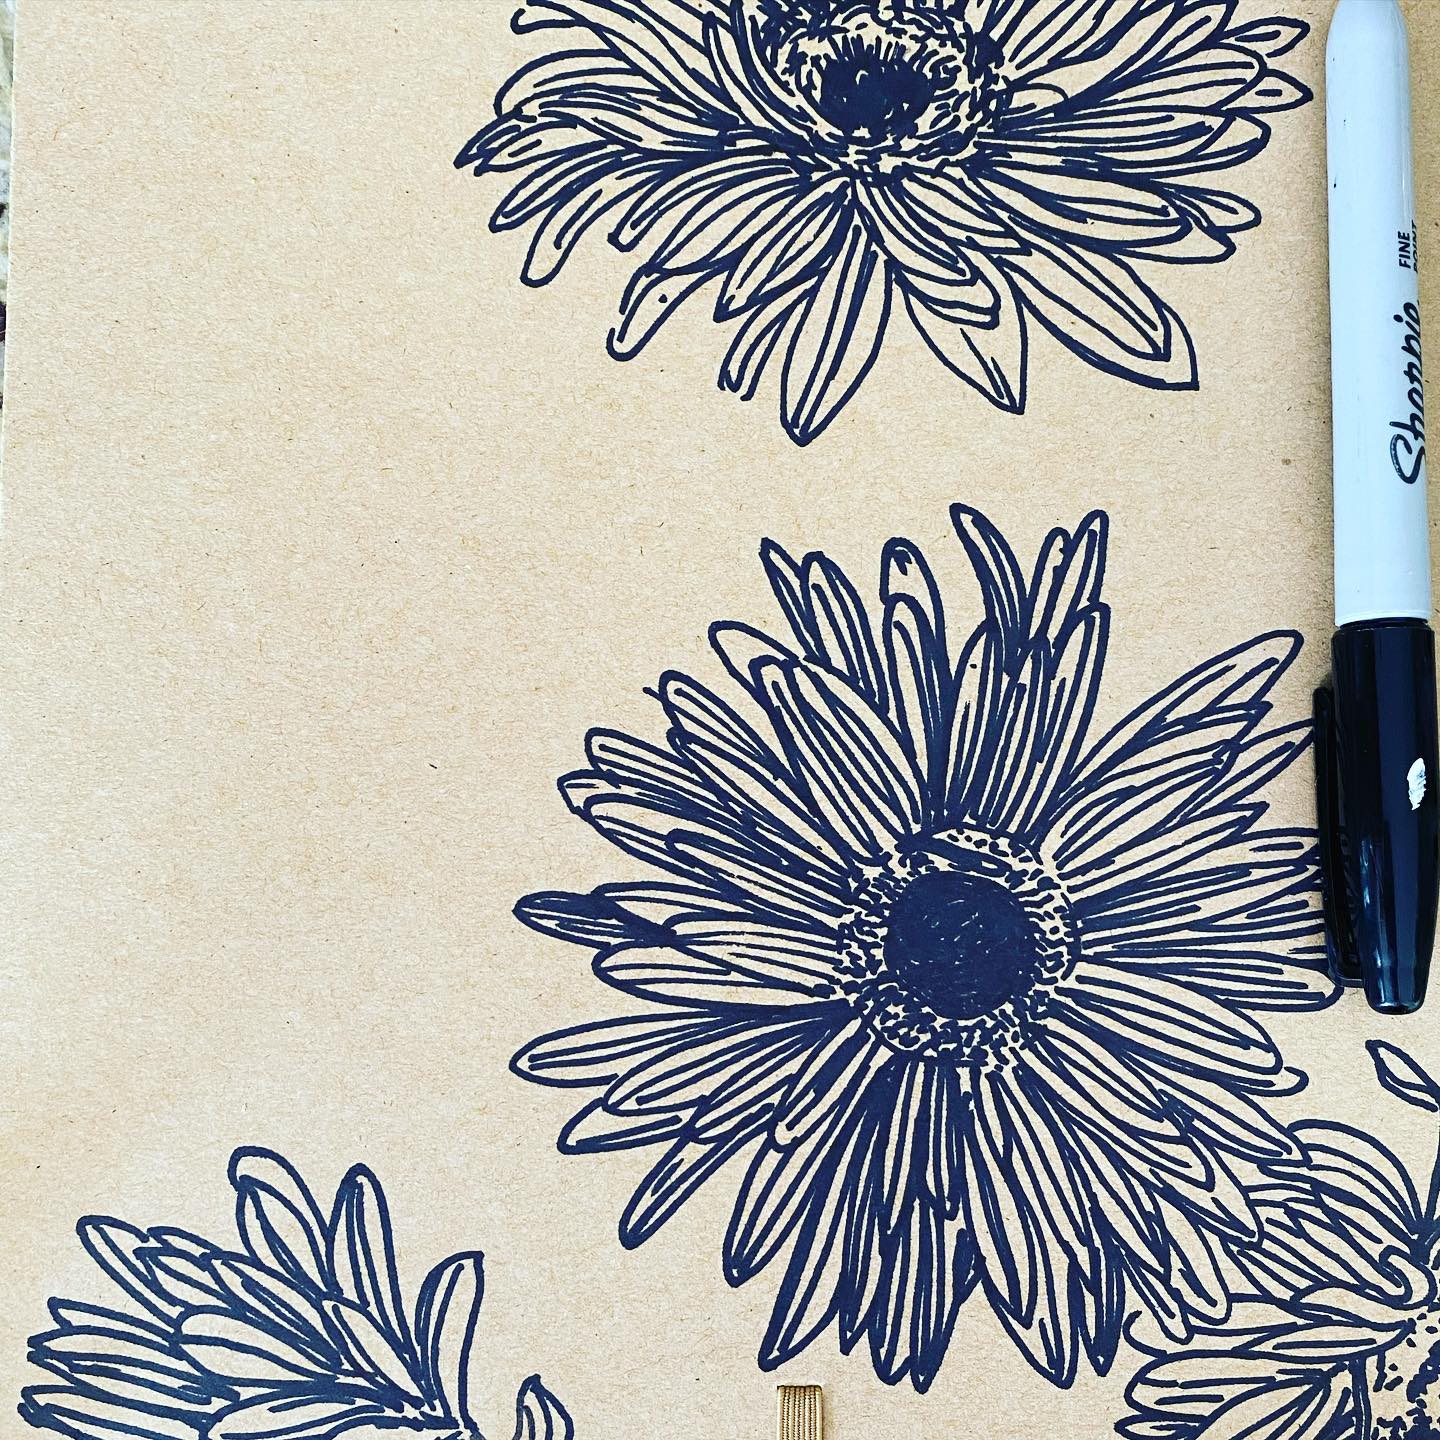 Basically, gerberas mean happiness!
The cover of my journal today…